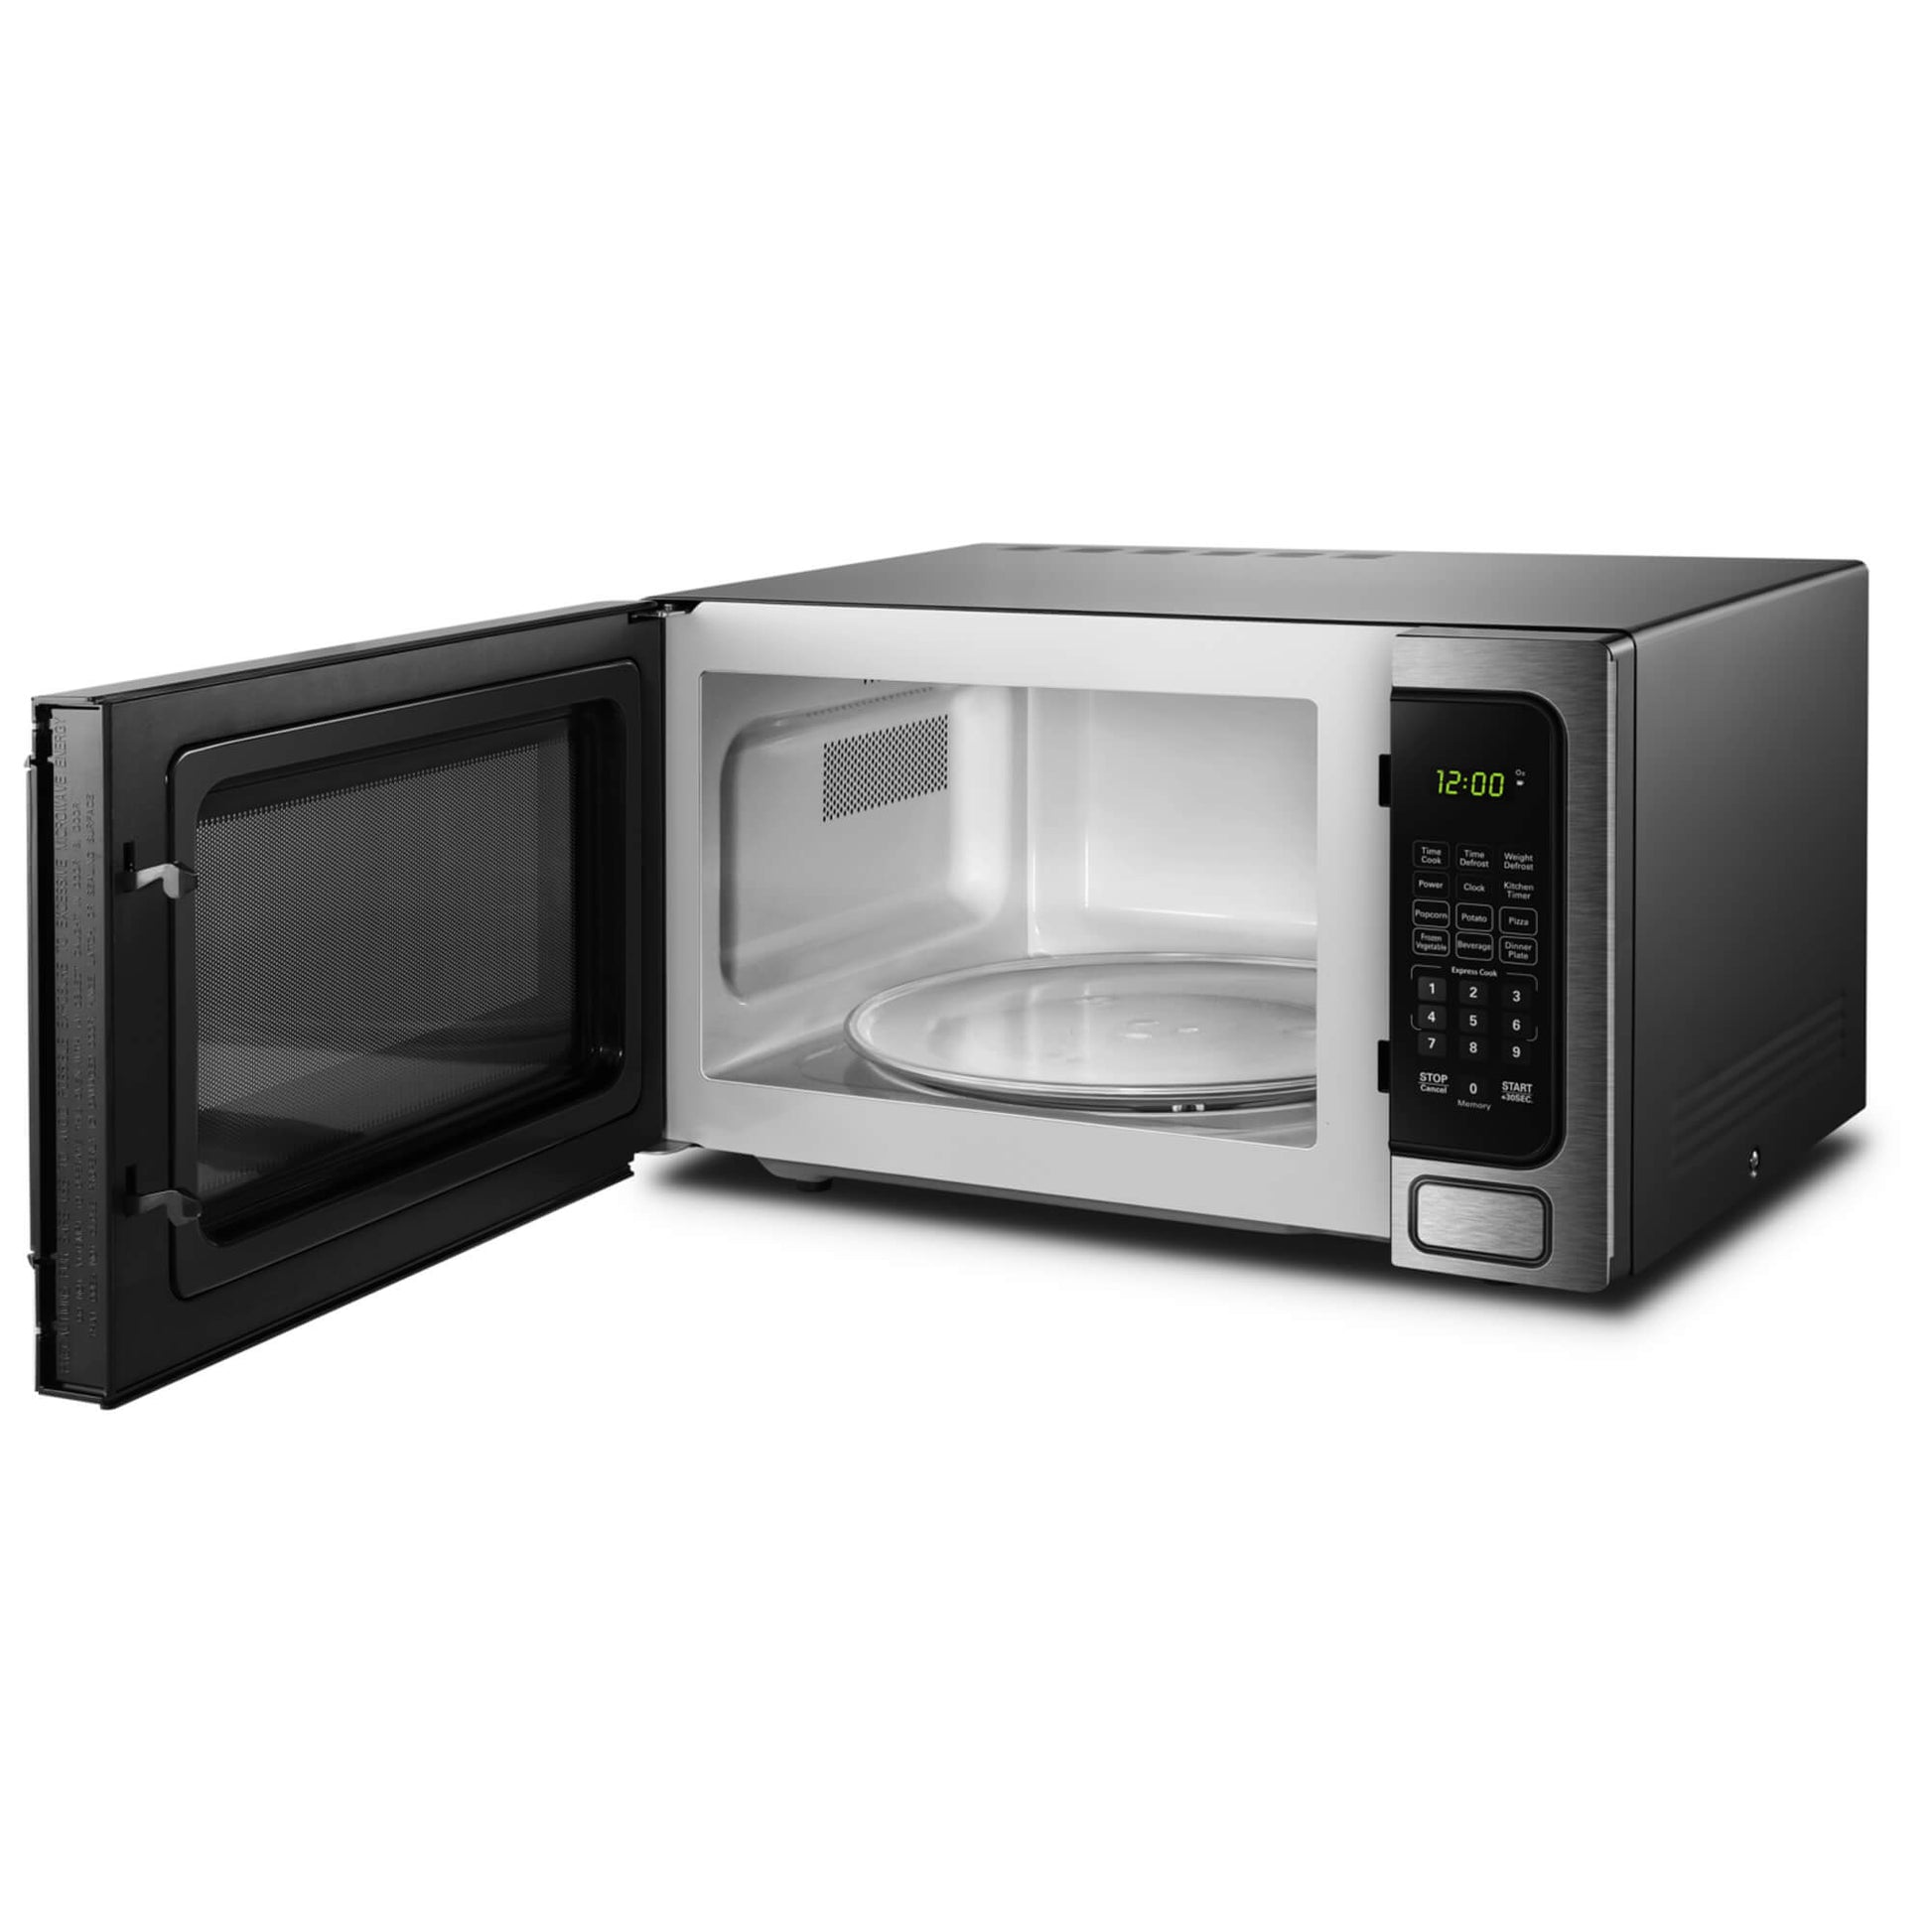 Danby 20" Stainless Steel Countertop Microwave With Convenience Cooking Controls - DDMW1125BBS